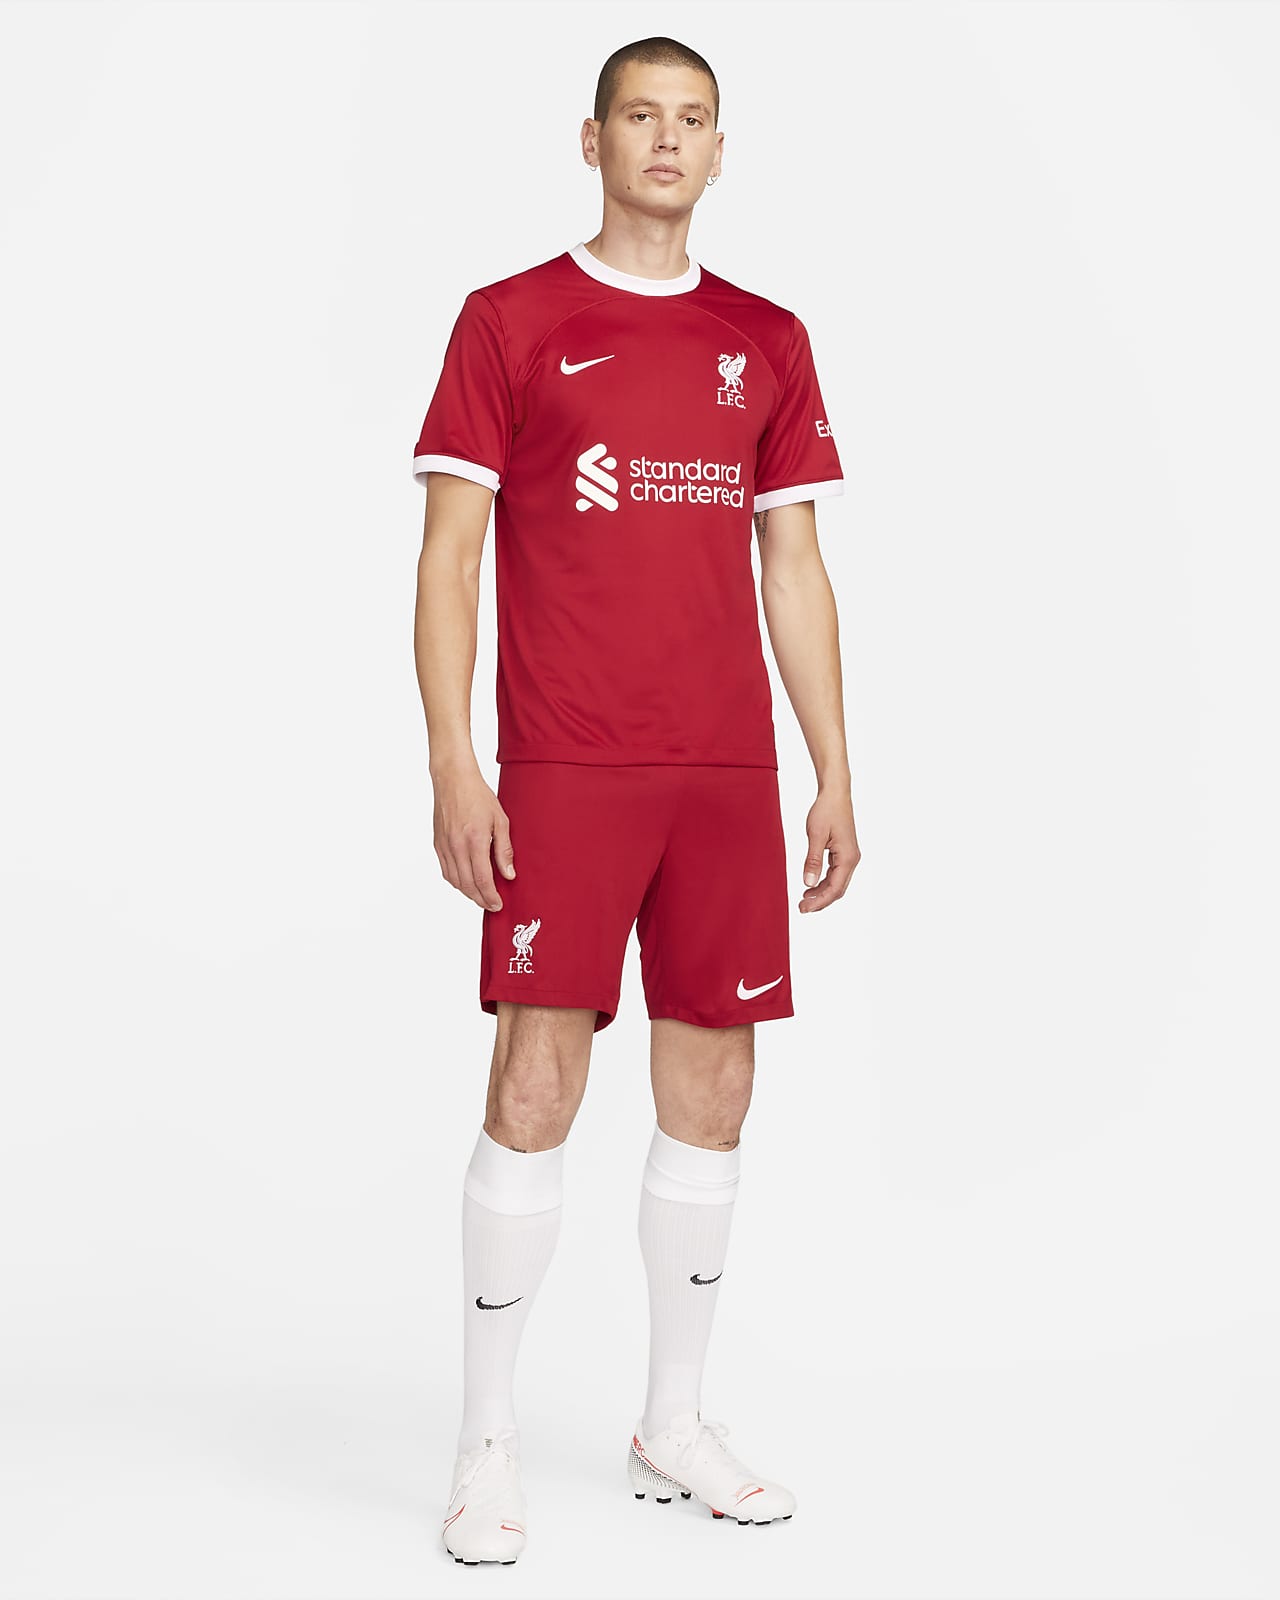 liverpool fc jersey for sale